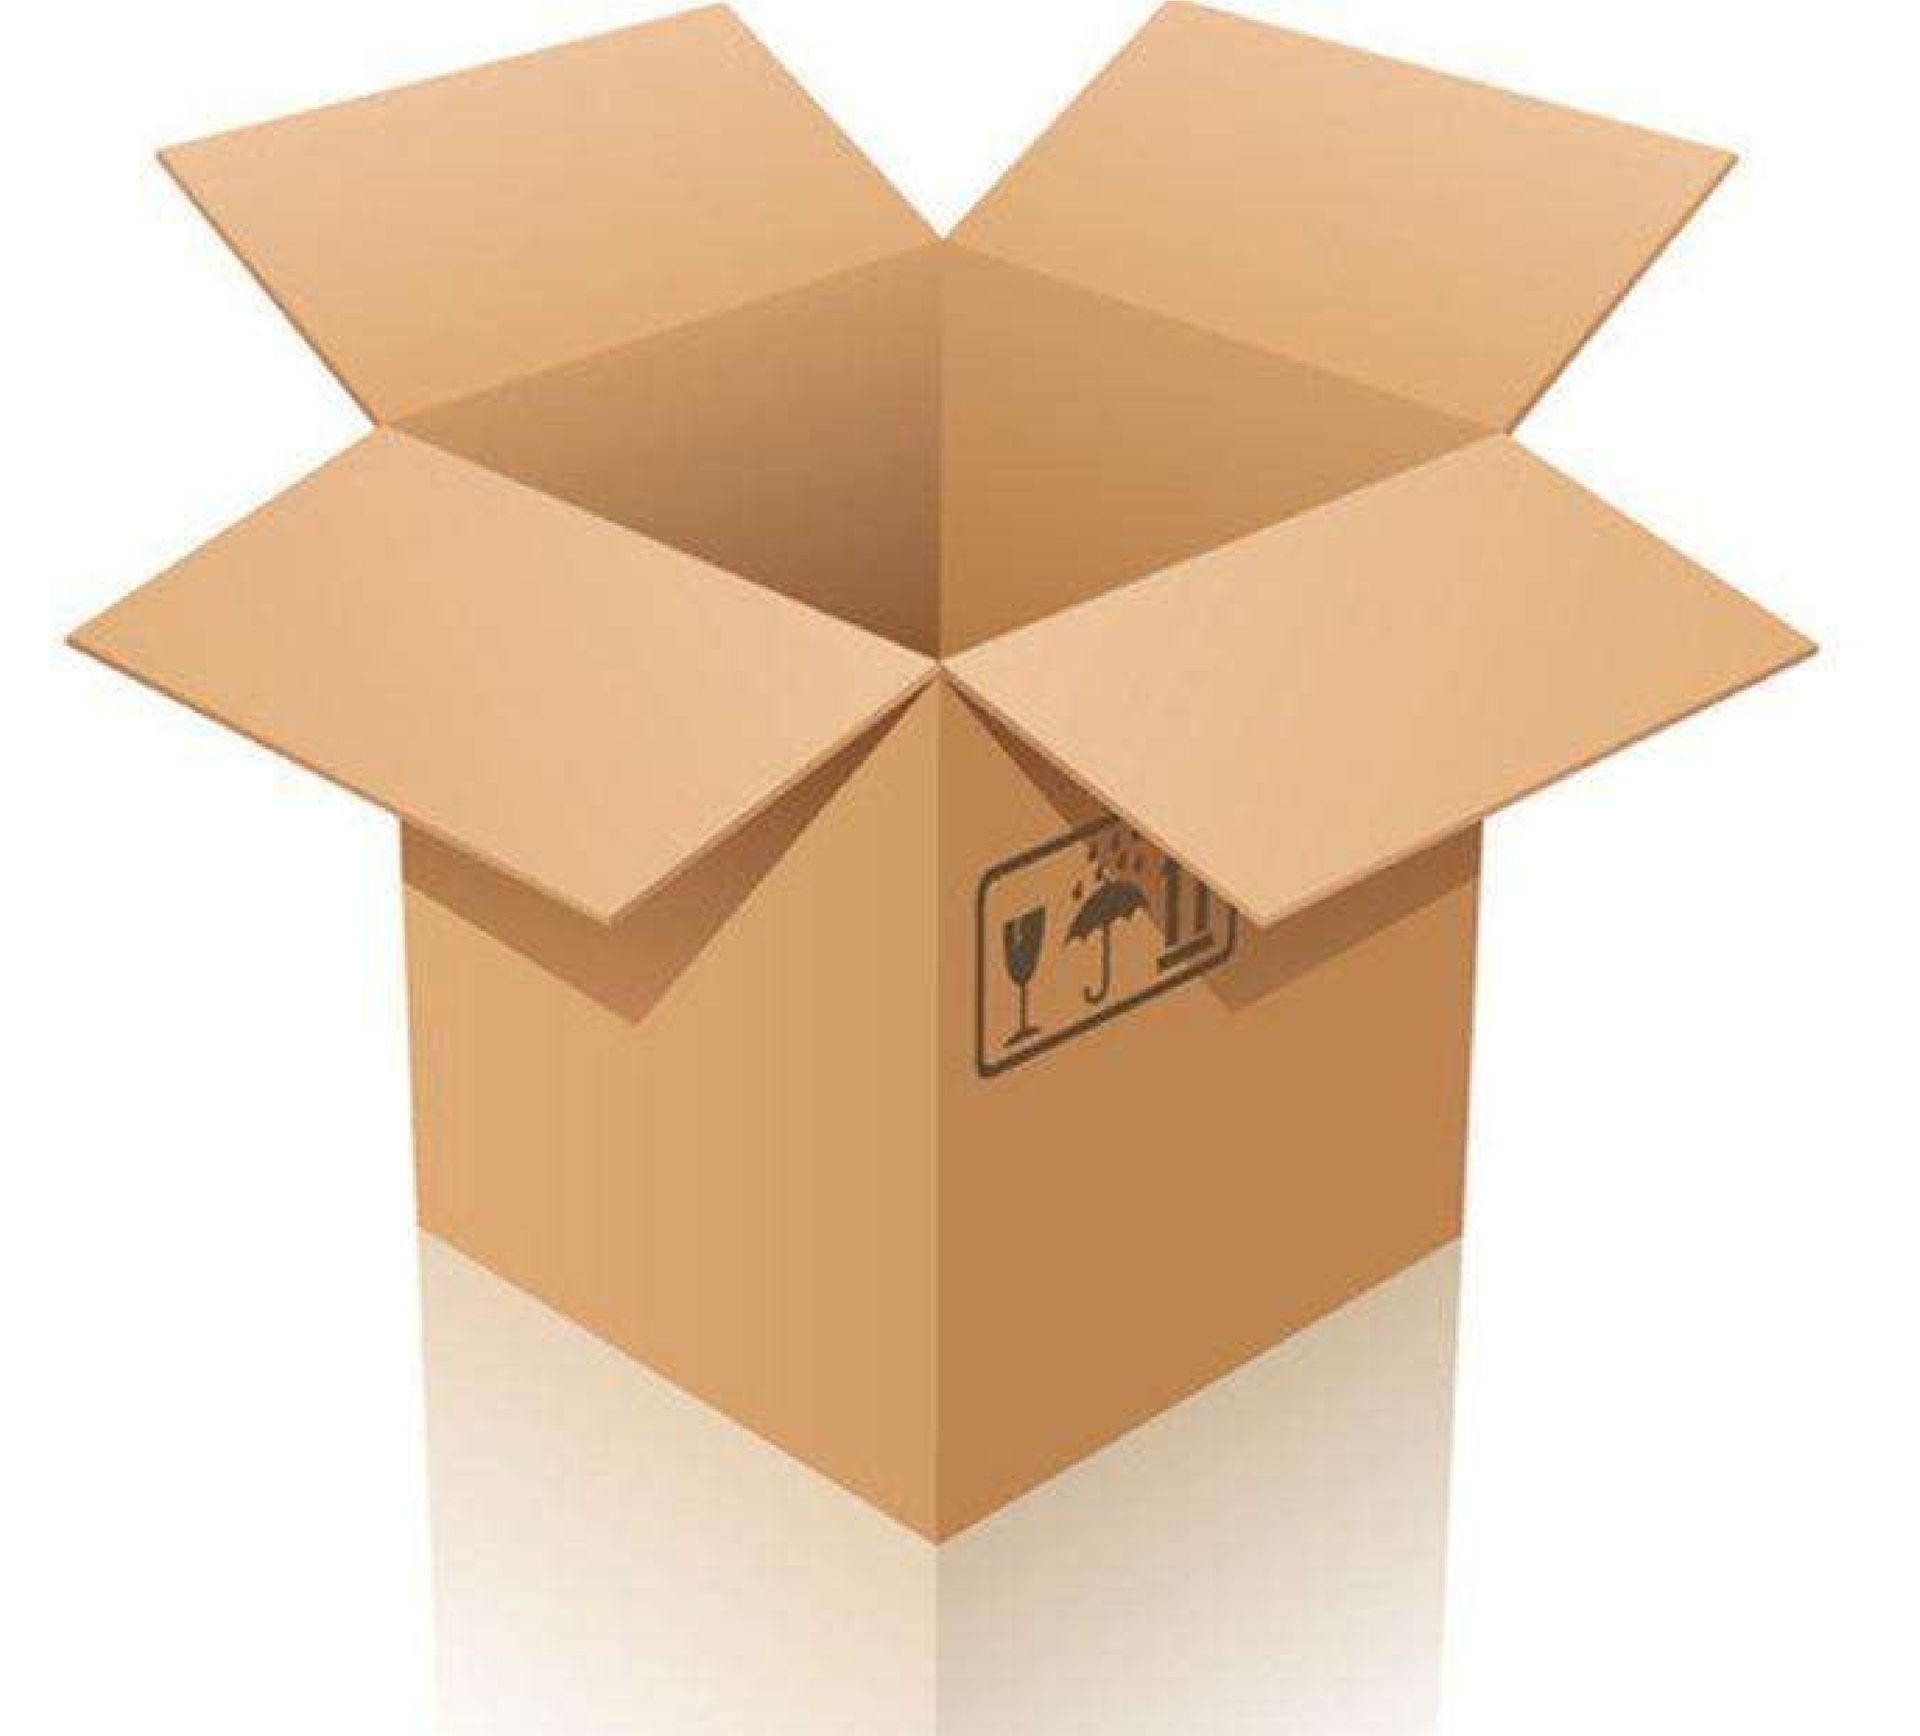 corrugated packaging companies